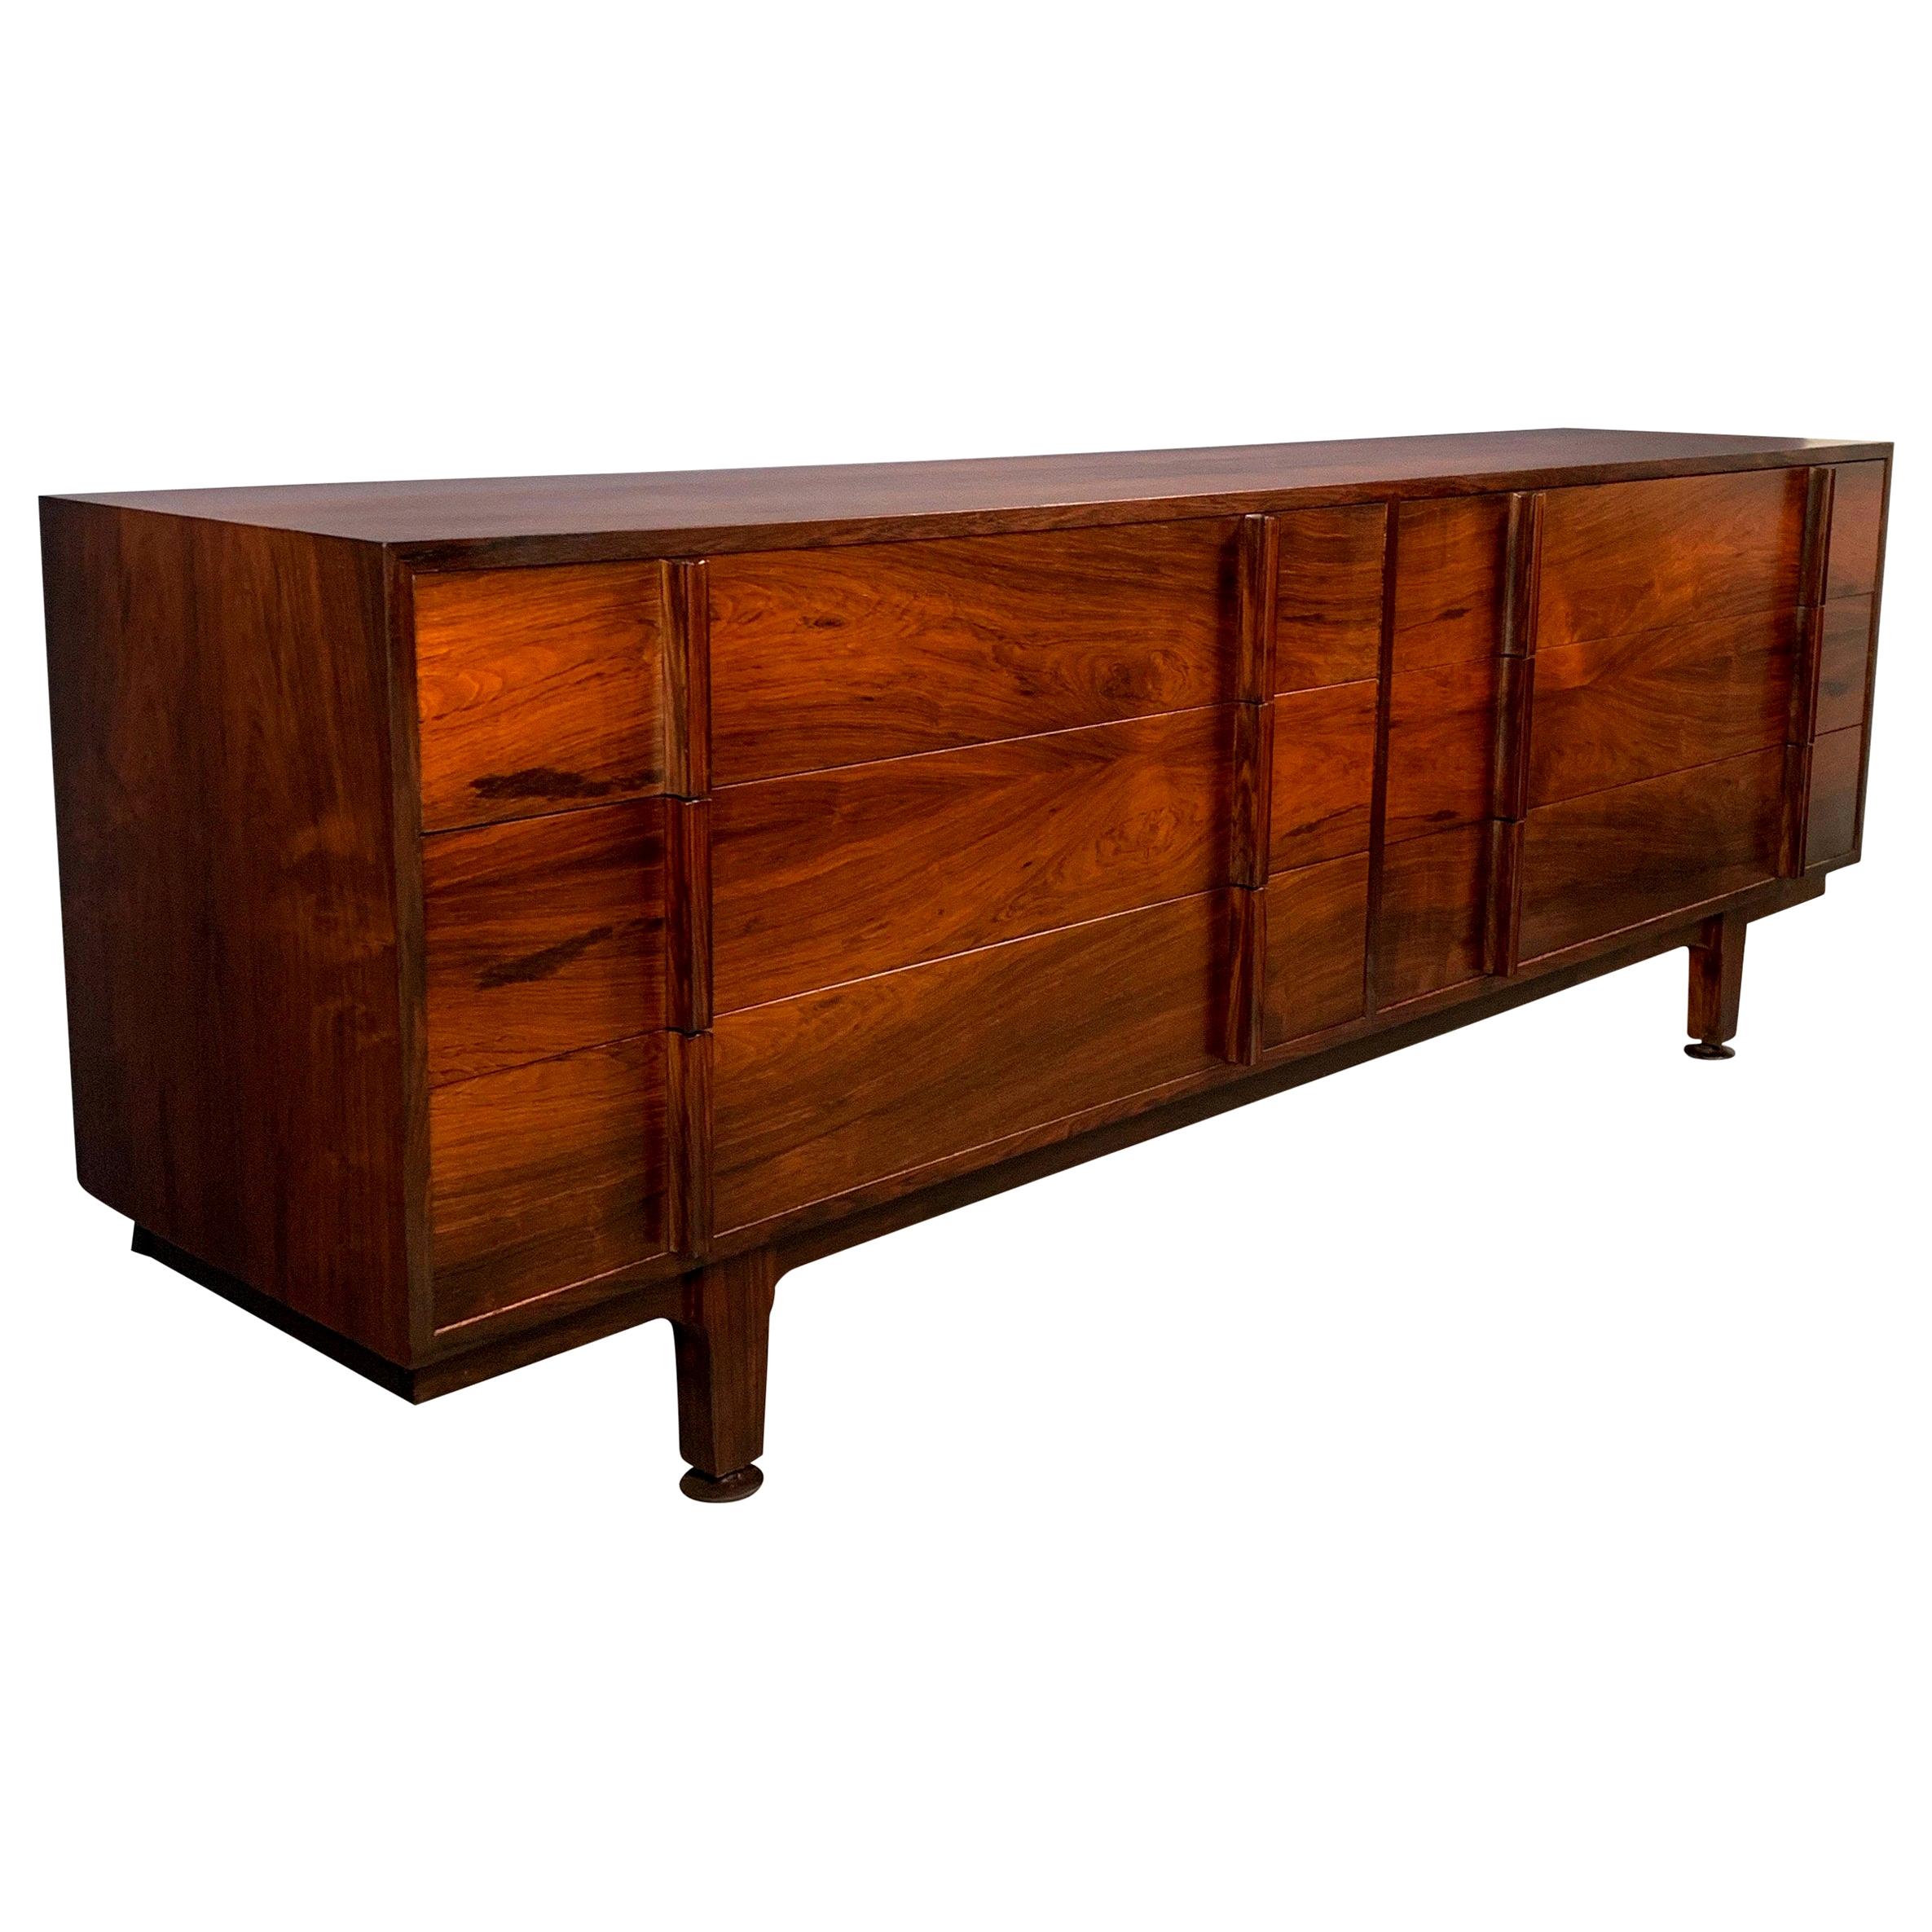 Jens Risom Style Rosewood Midcentury Dresser with Extraordinary Grain